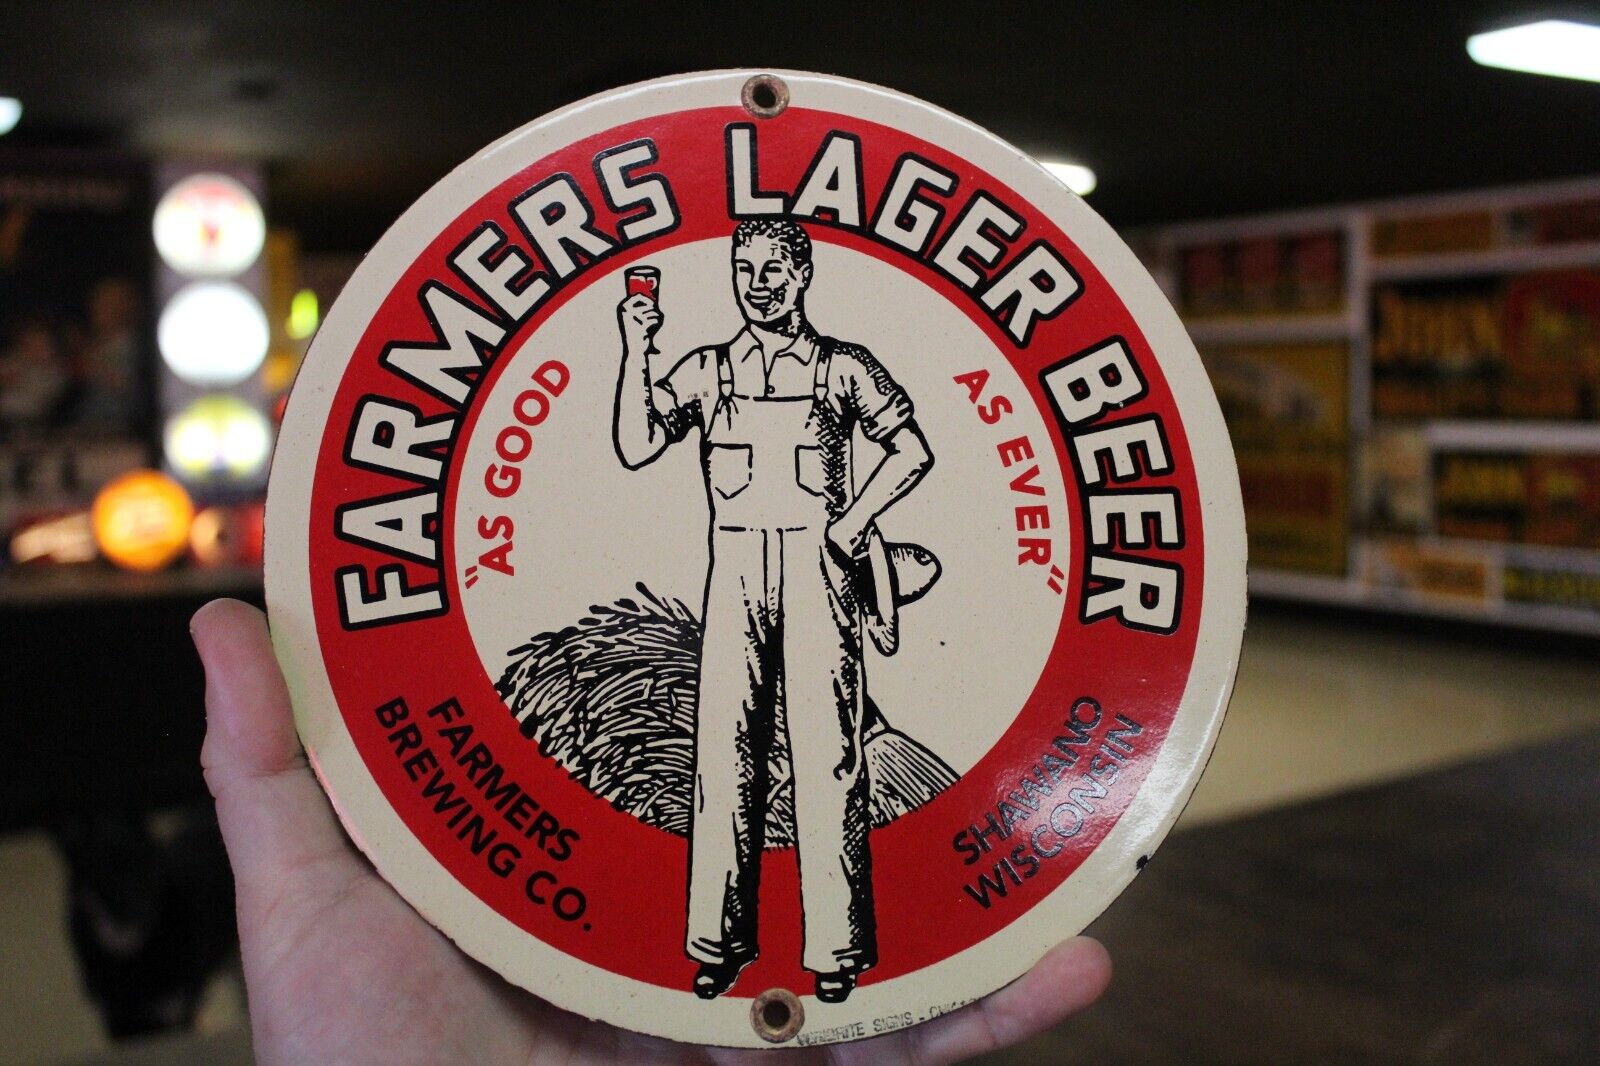 RARE FARMERS LAGER BEER SHAWANO BREWING  DEALER PORCELAIN METAL SIGN WISCONSIN